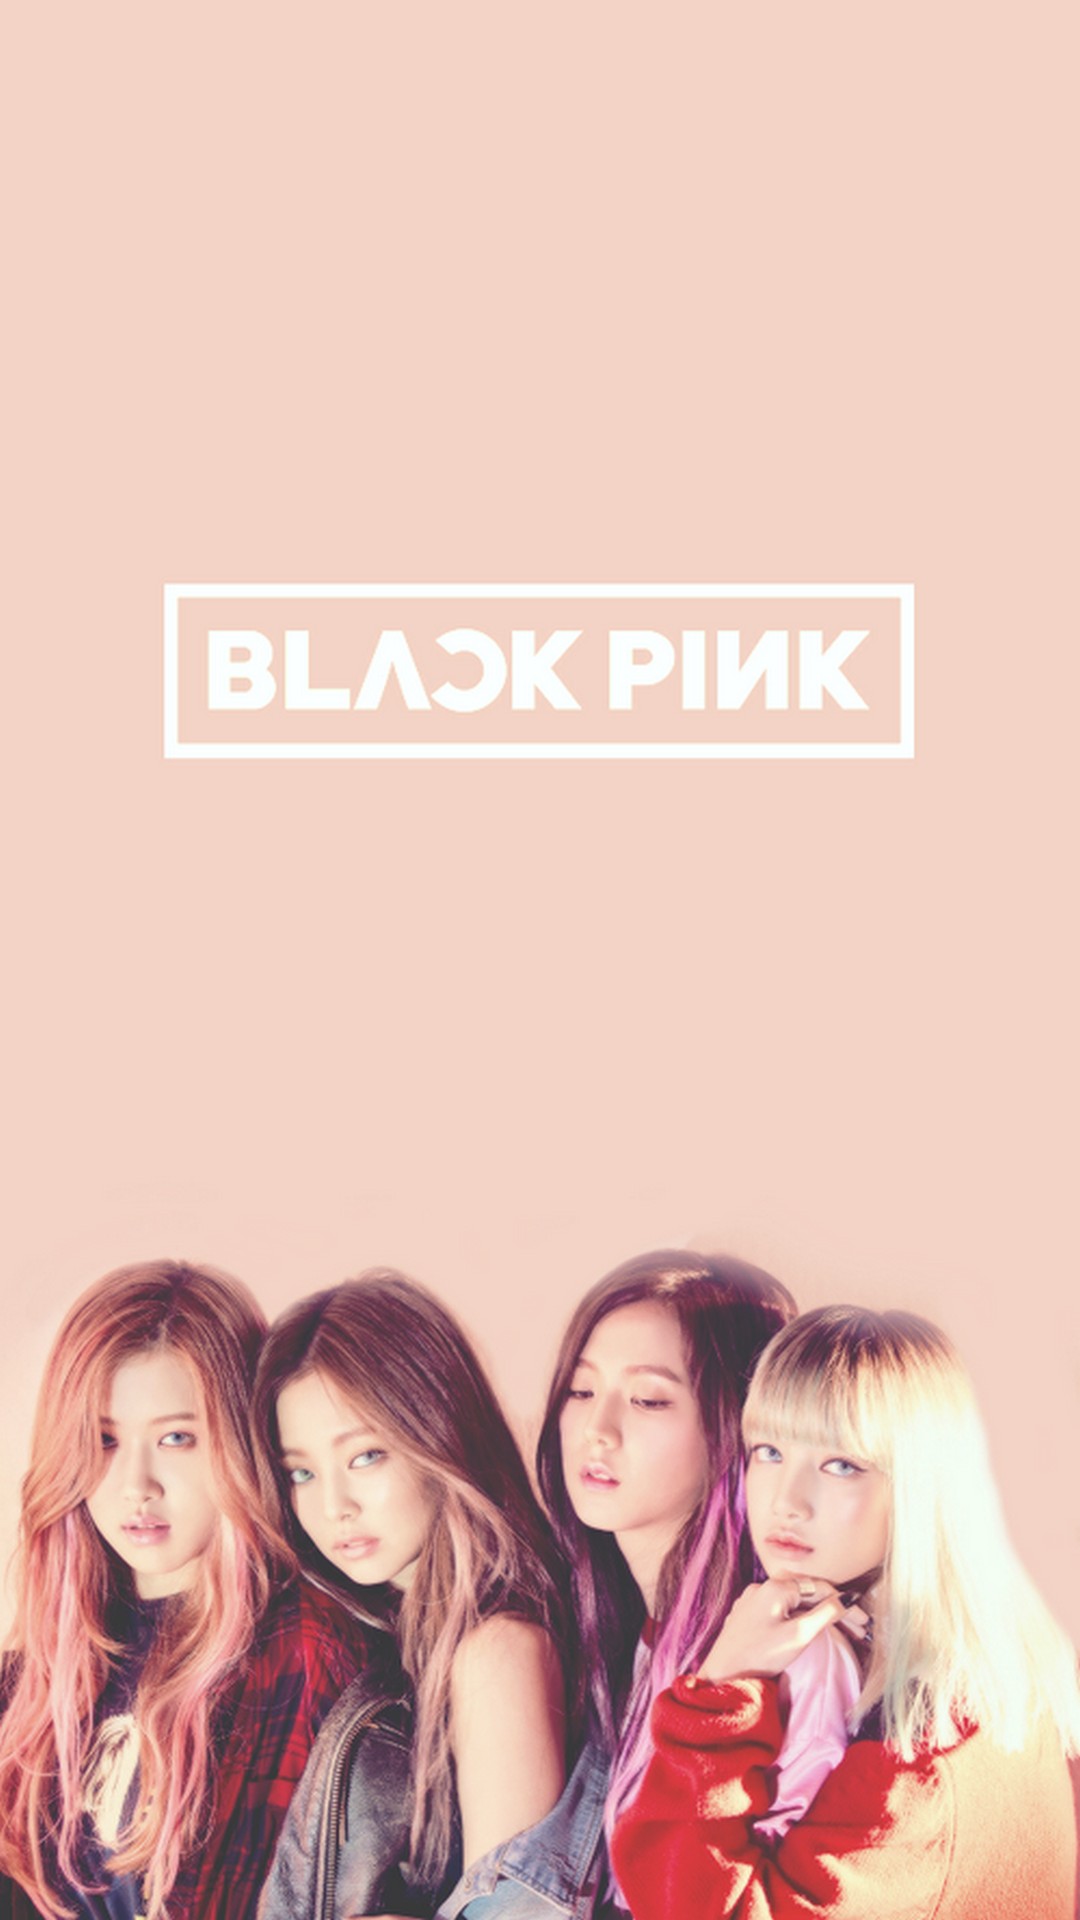 Blackpink iPhone Backgrounds With high-resolution 1080X1920 pixel. You can set as wallpaper for Apple iPhone X, XS Max, XR, 8, 7, 6, SE, iPad. Enjoy and share your favorite HD wallpapers and background images